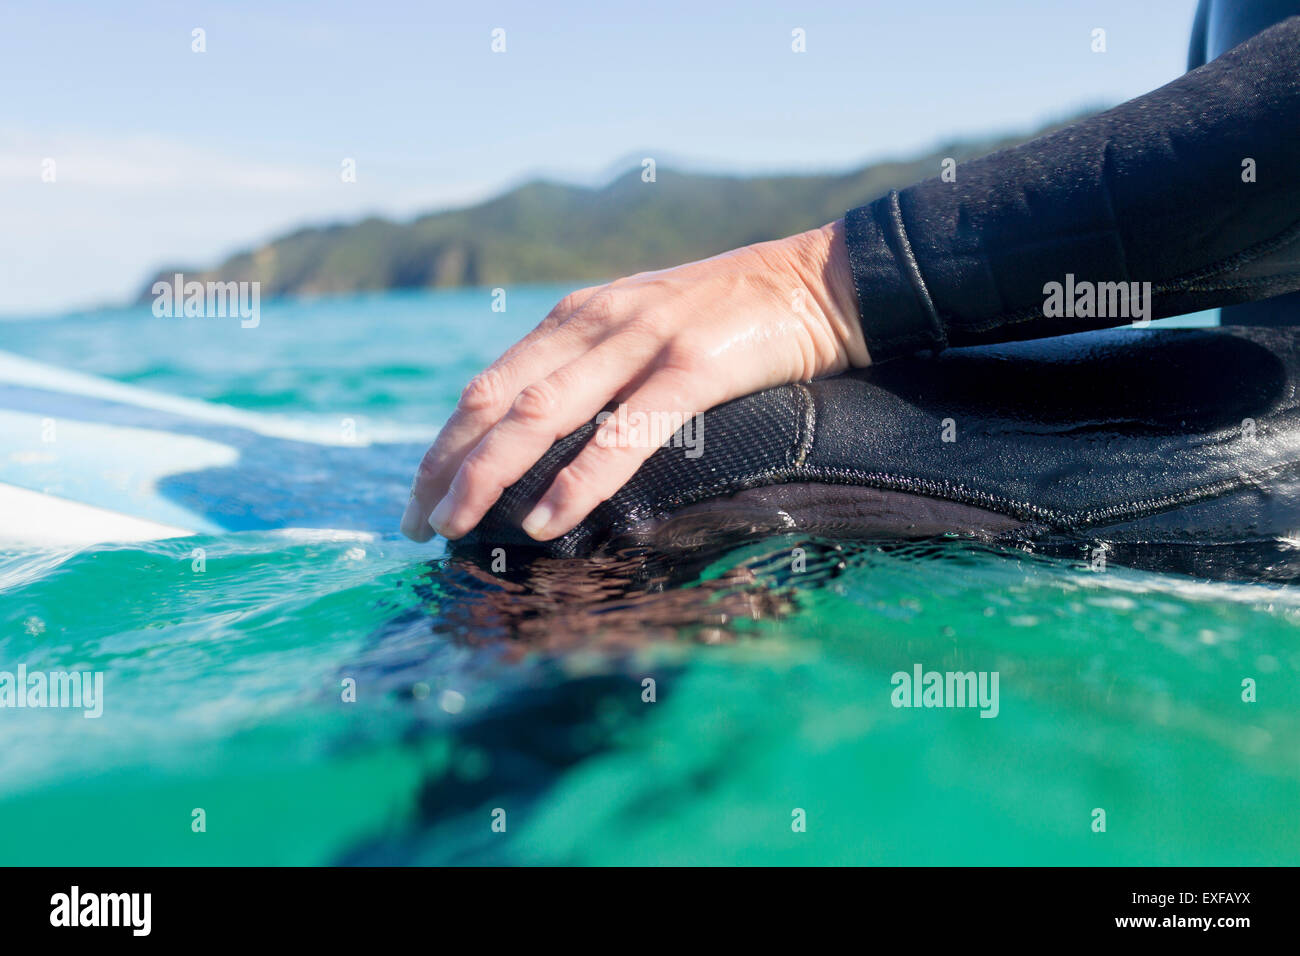 Hands of surfer in the water, Bay of Islands, NZ Stock Photo